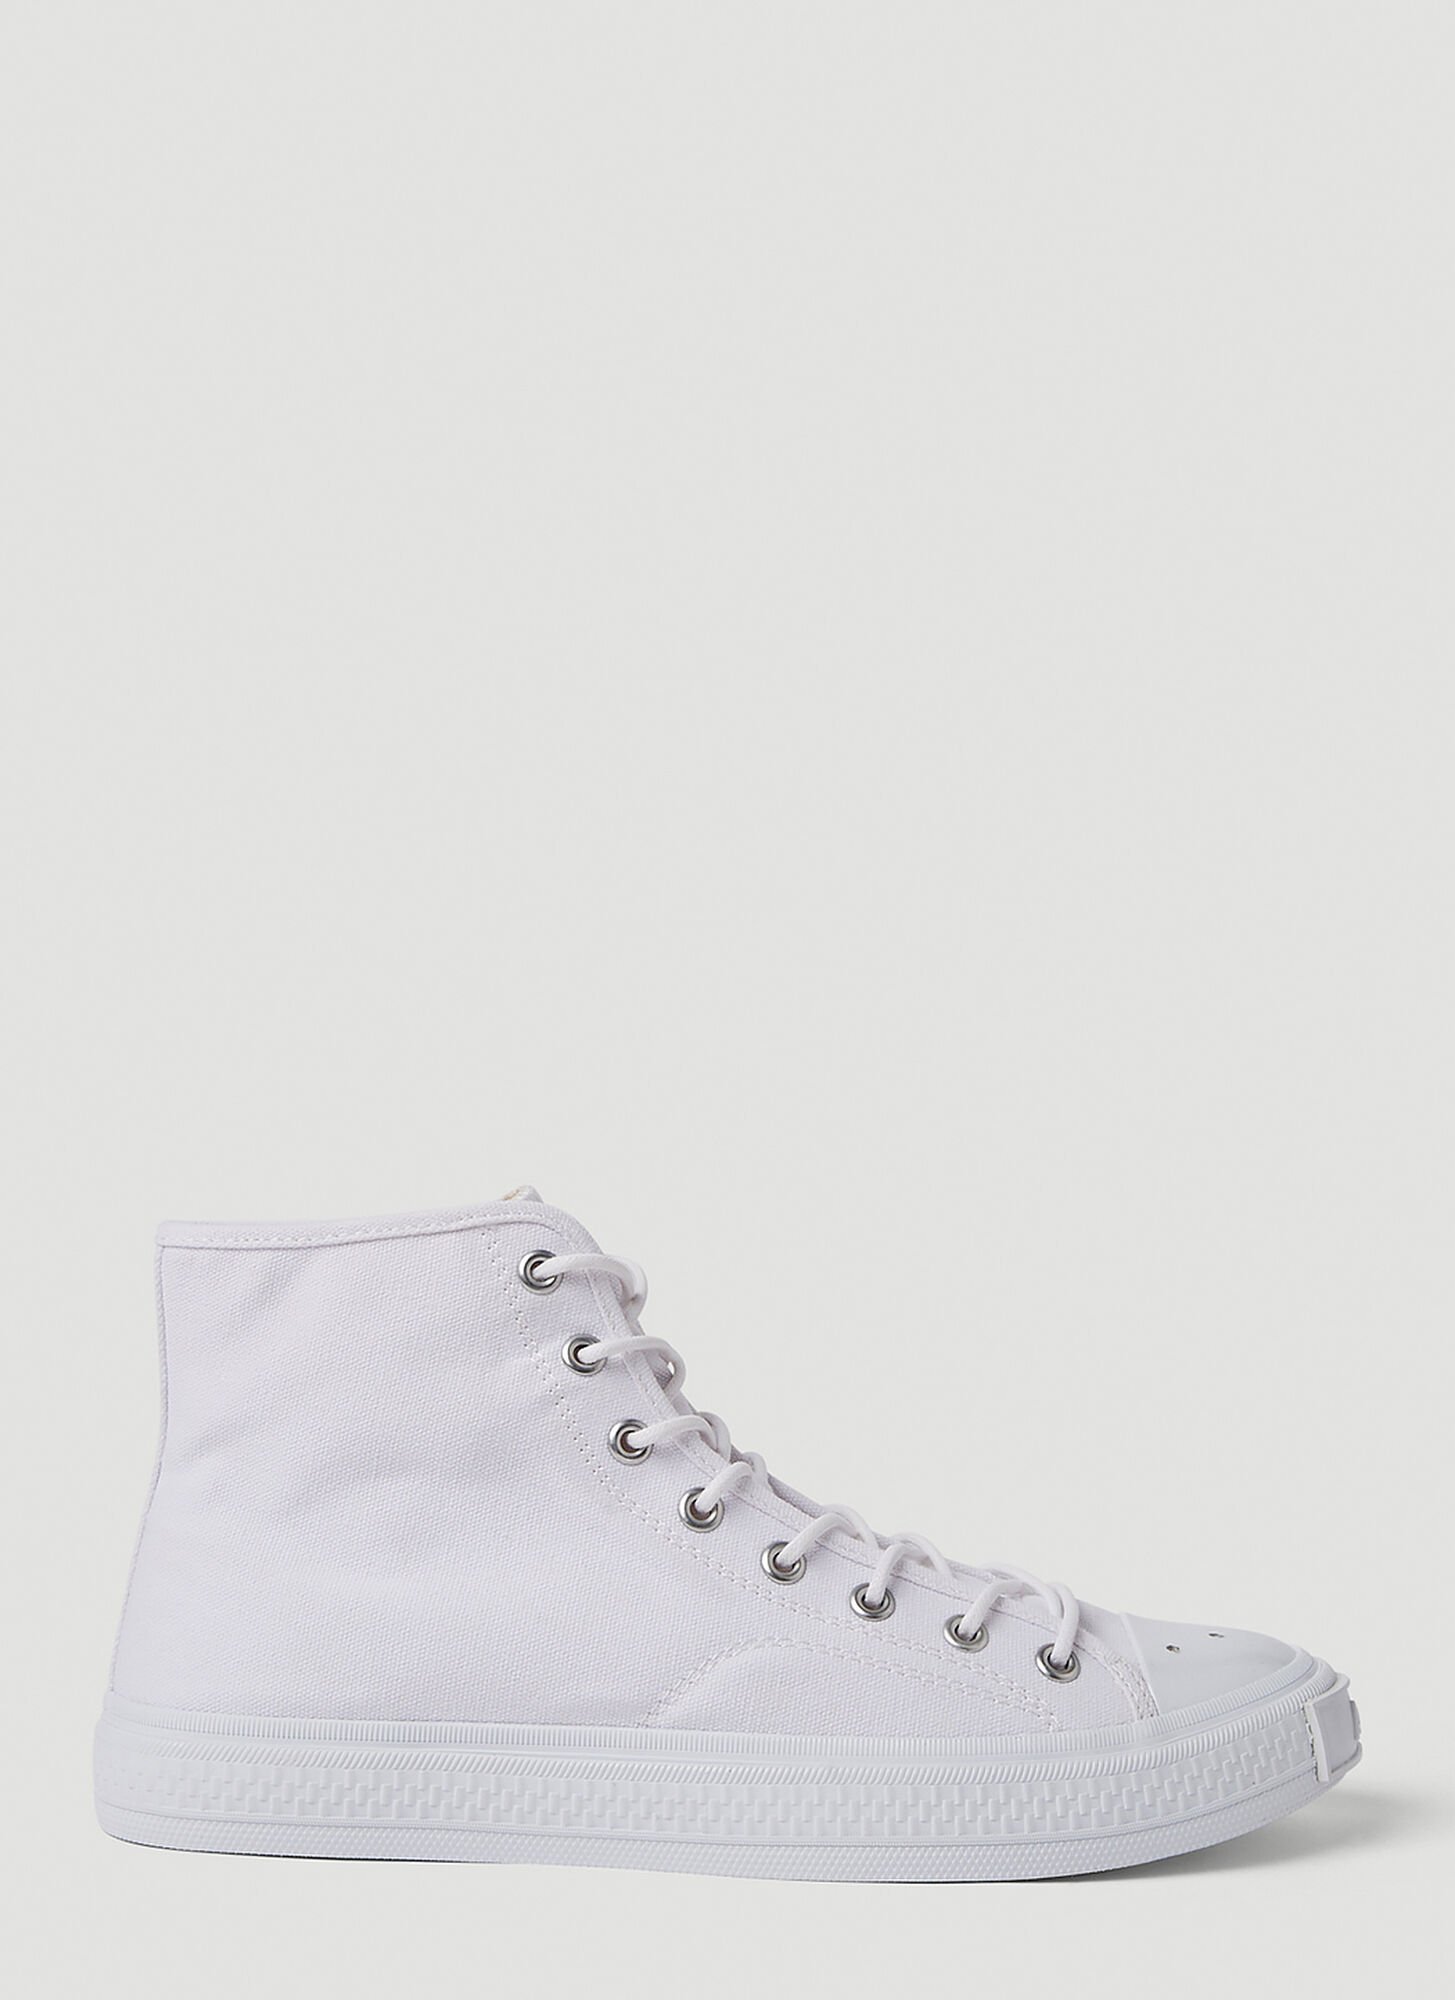 Shop Acne Studios Canvas High Top Sneakers In White